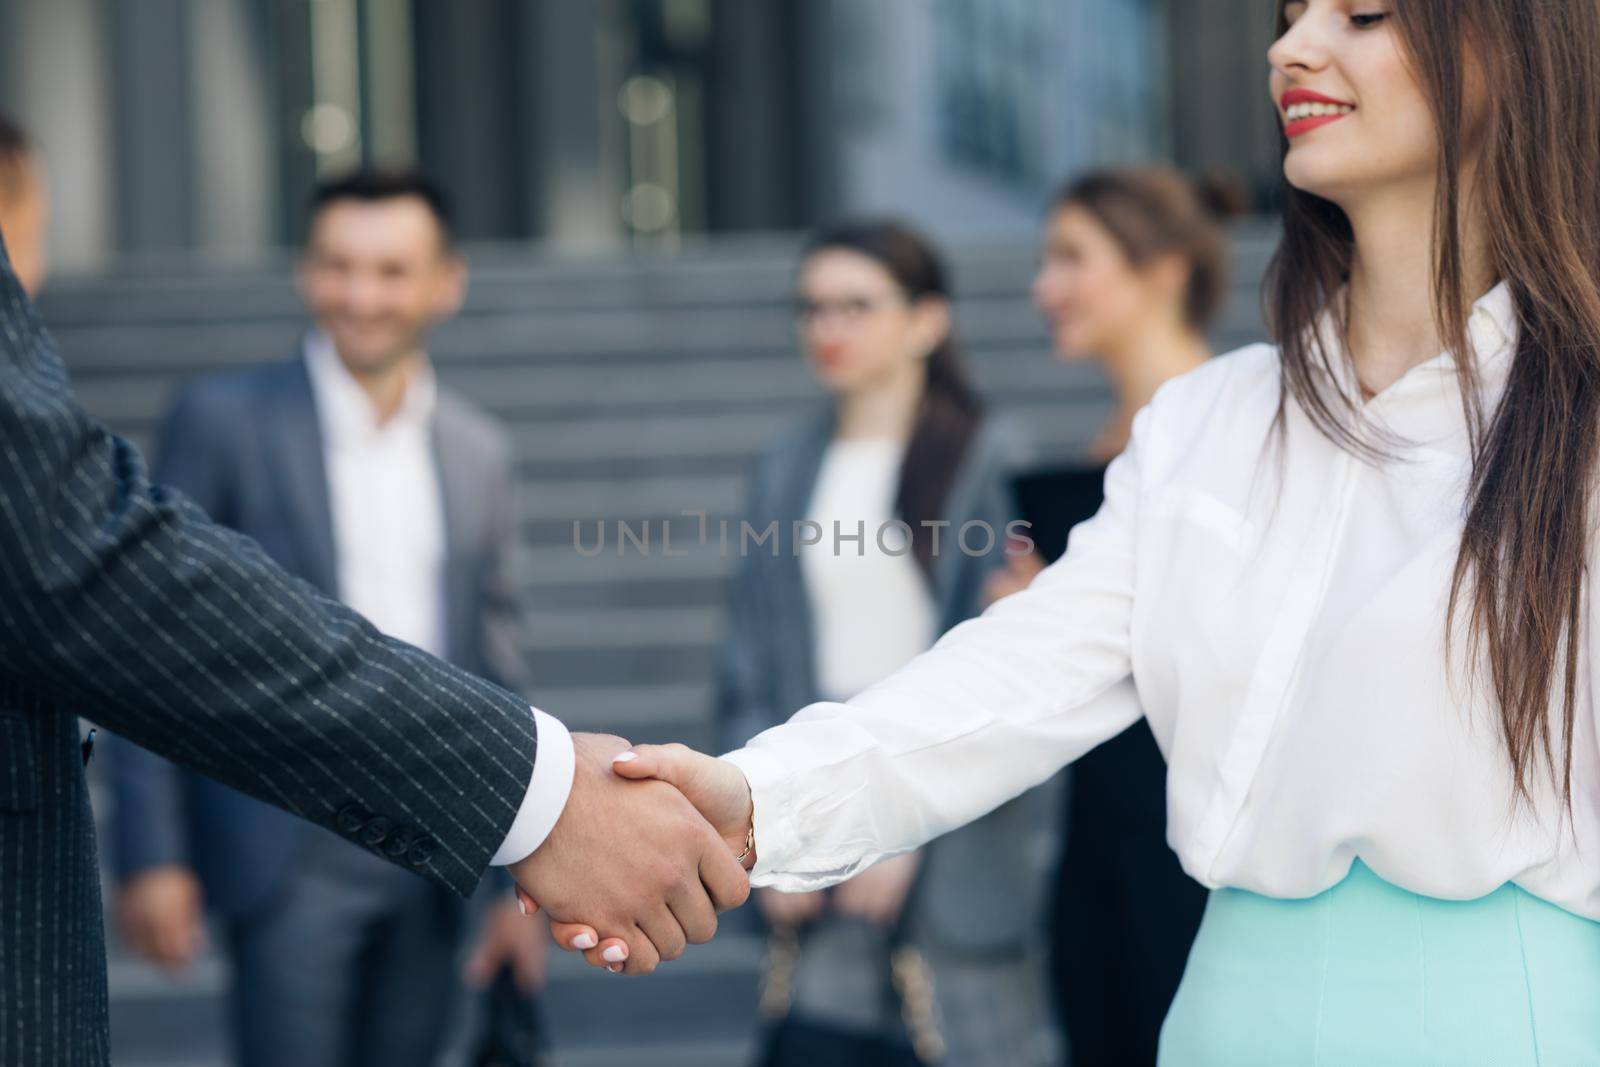 Friendly Handshake Man and Woman. Meeting of Two Business People outdoors. Unrecognizable couple Person Greeting Each Other. Multicultural Shaking Hands Closeup Shot. by uflypro